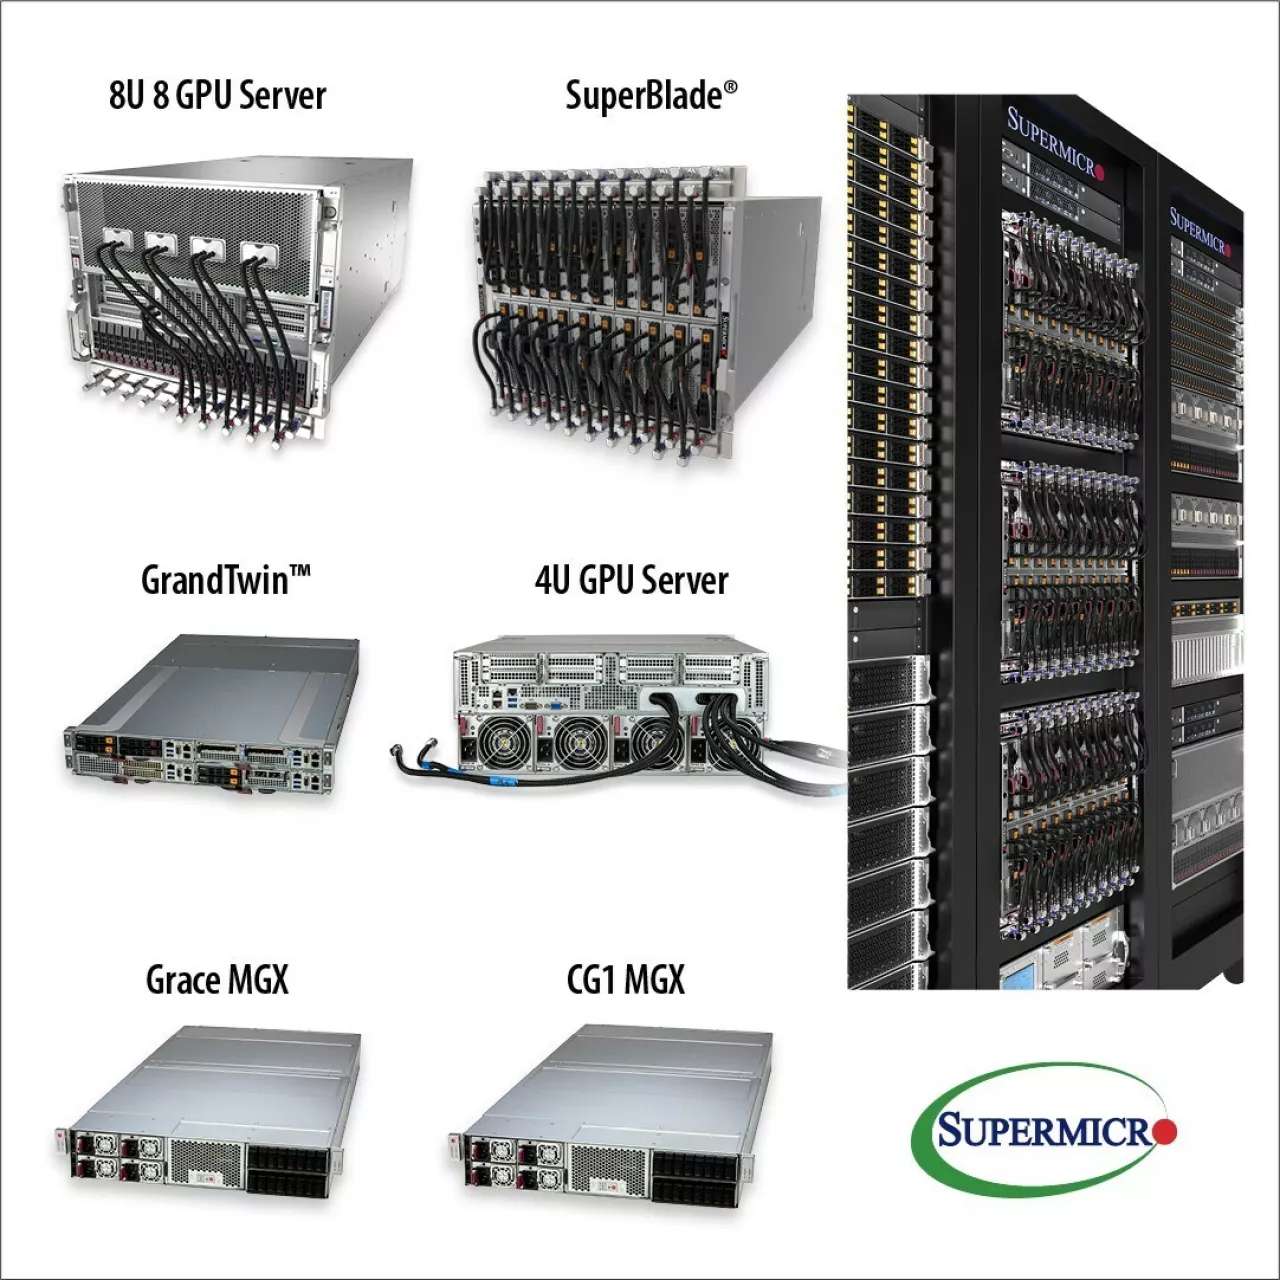 Supermicro COMPUTEX Keynote Unveils Company's Accelerate Everything Strategy for Product Innovation, Manufacturing Scale & Green Technology